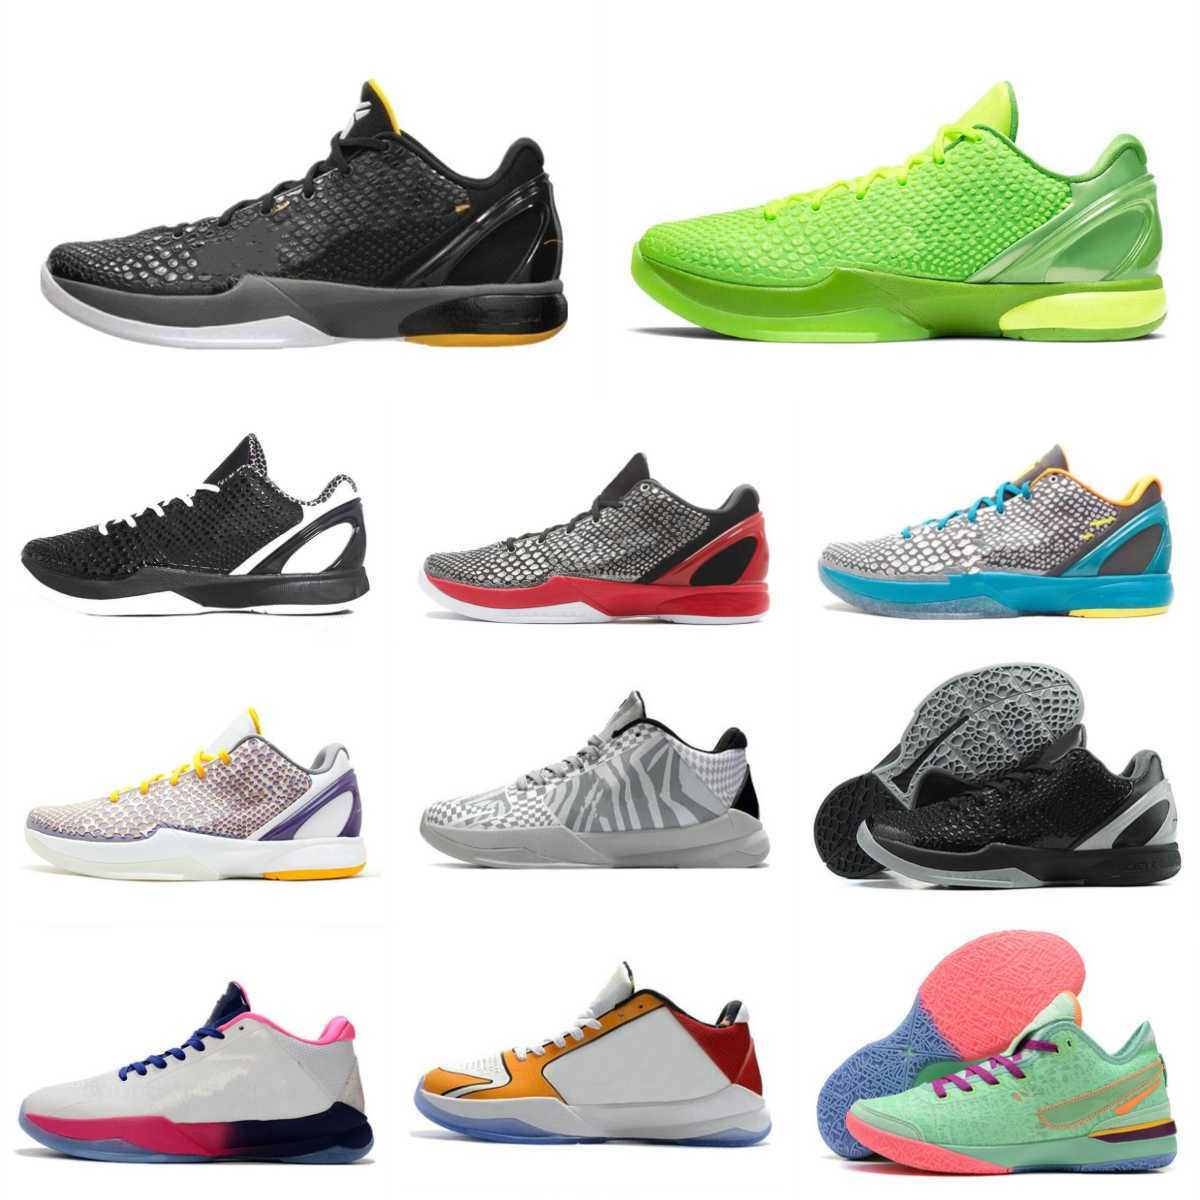 

Trainers Mamba 6 Sports Basketball Shoes Lakers Protro System Metallic Gold Black Mambacita Air Zoom 5 Six Series What If 7 8 Grey Silver Red Outdoor Designer Sneakers, Please contact us